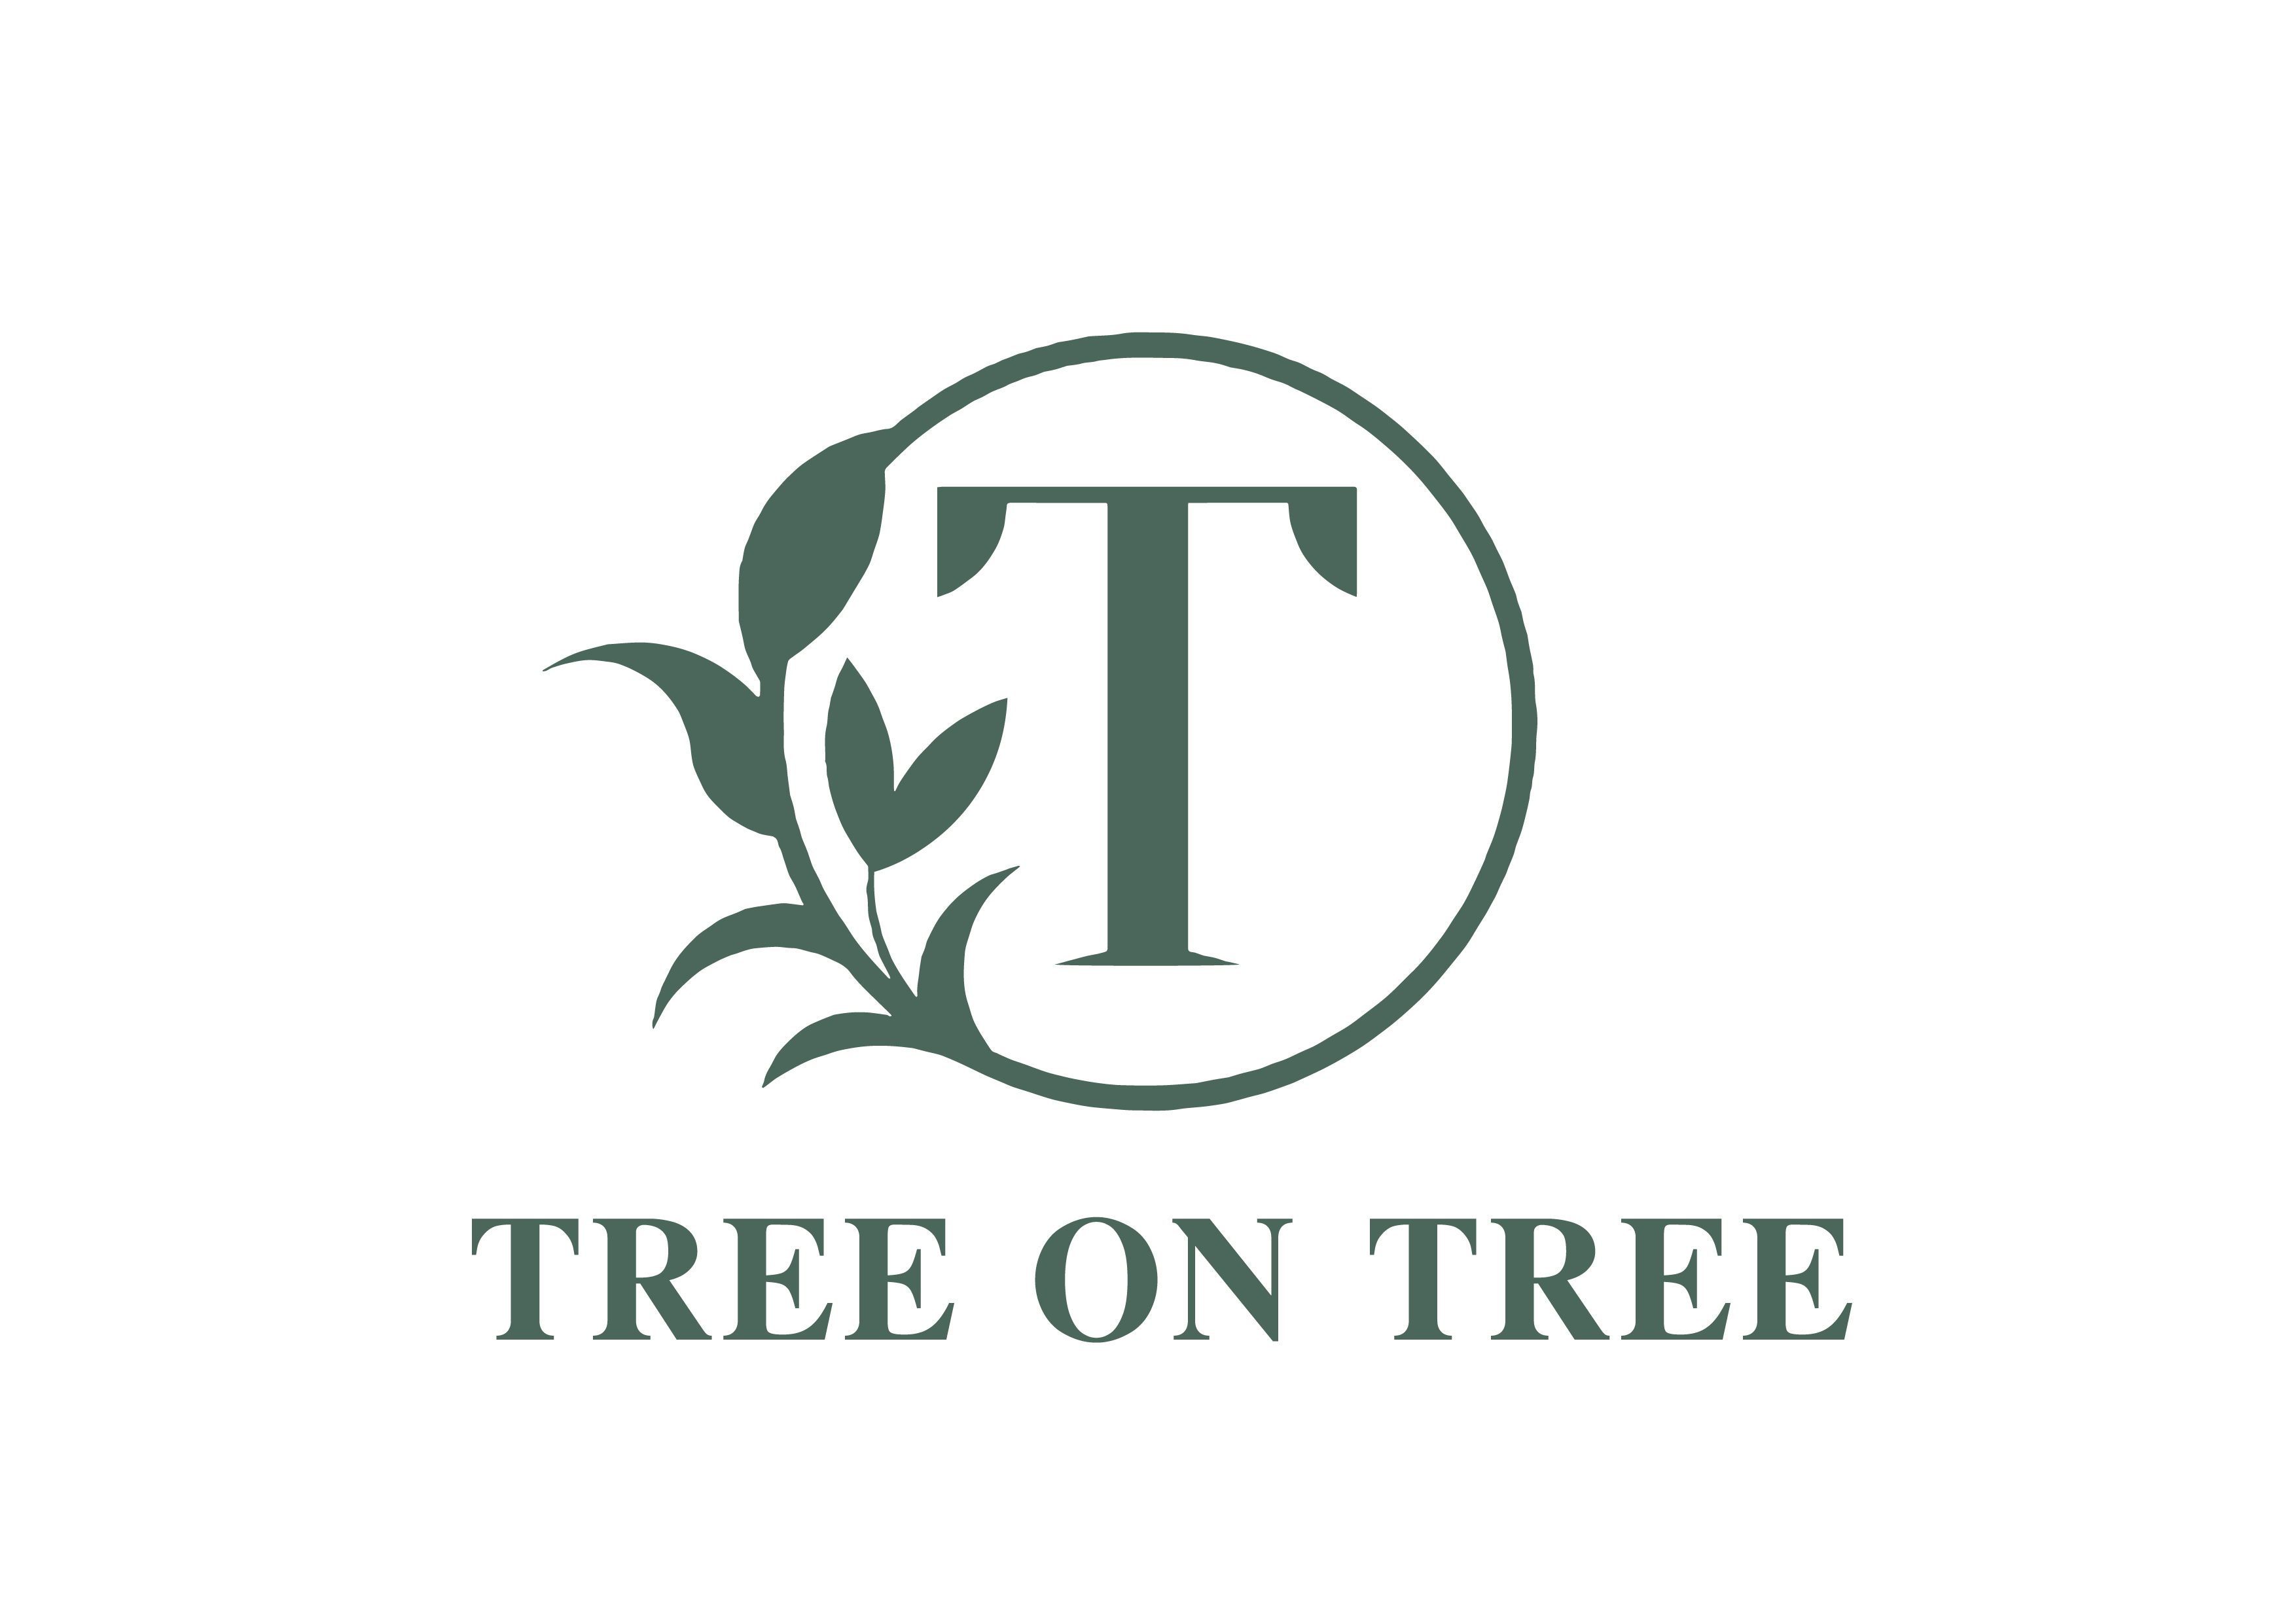 https://image.sistacafe.com/images/uploads/review/brand/treeontree.png